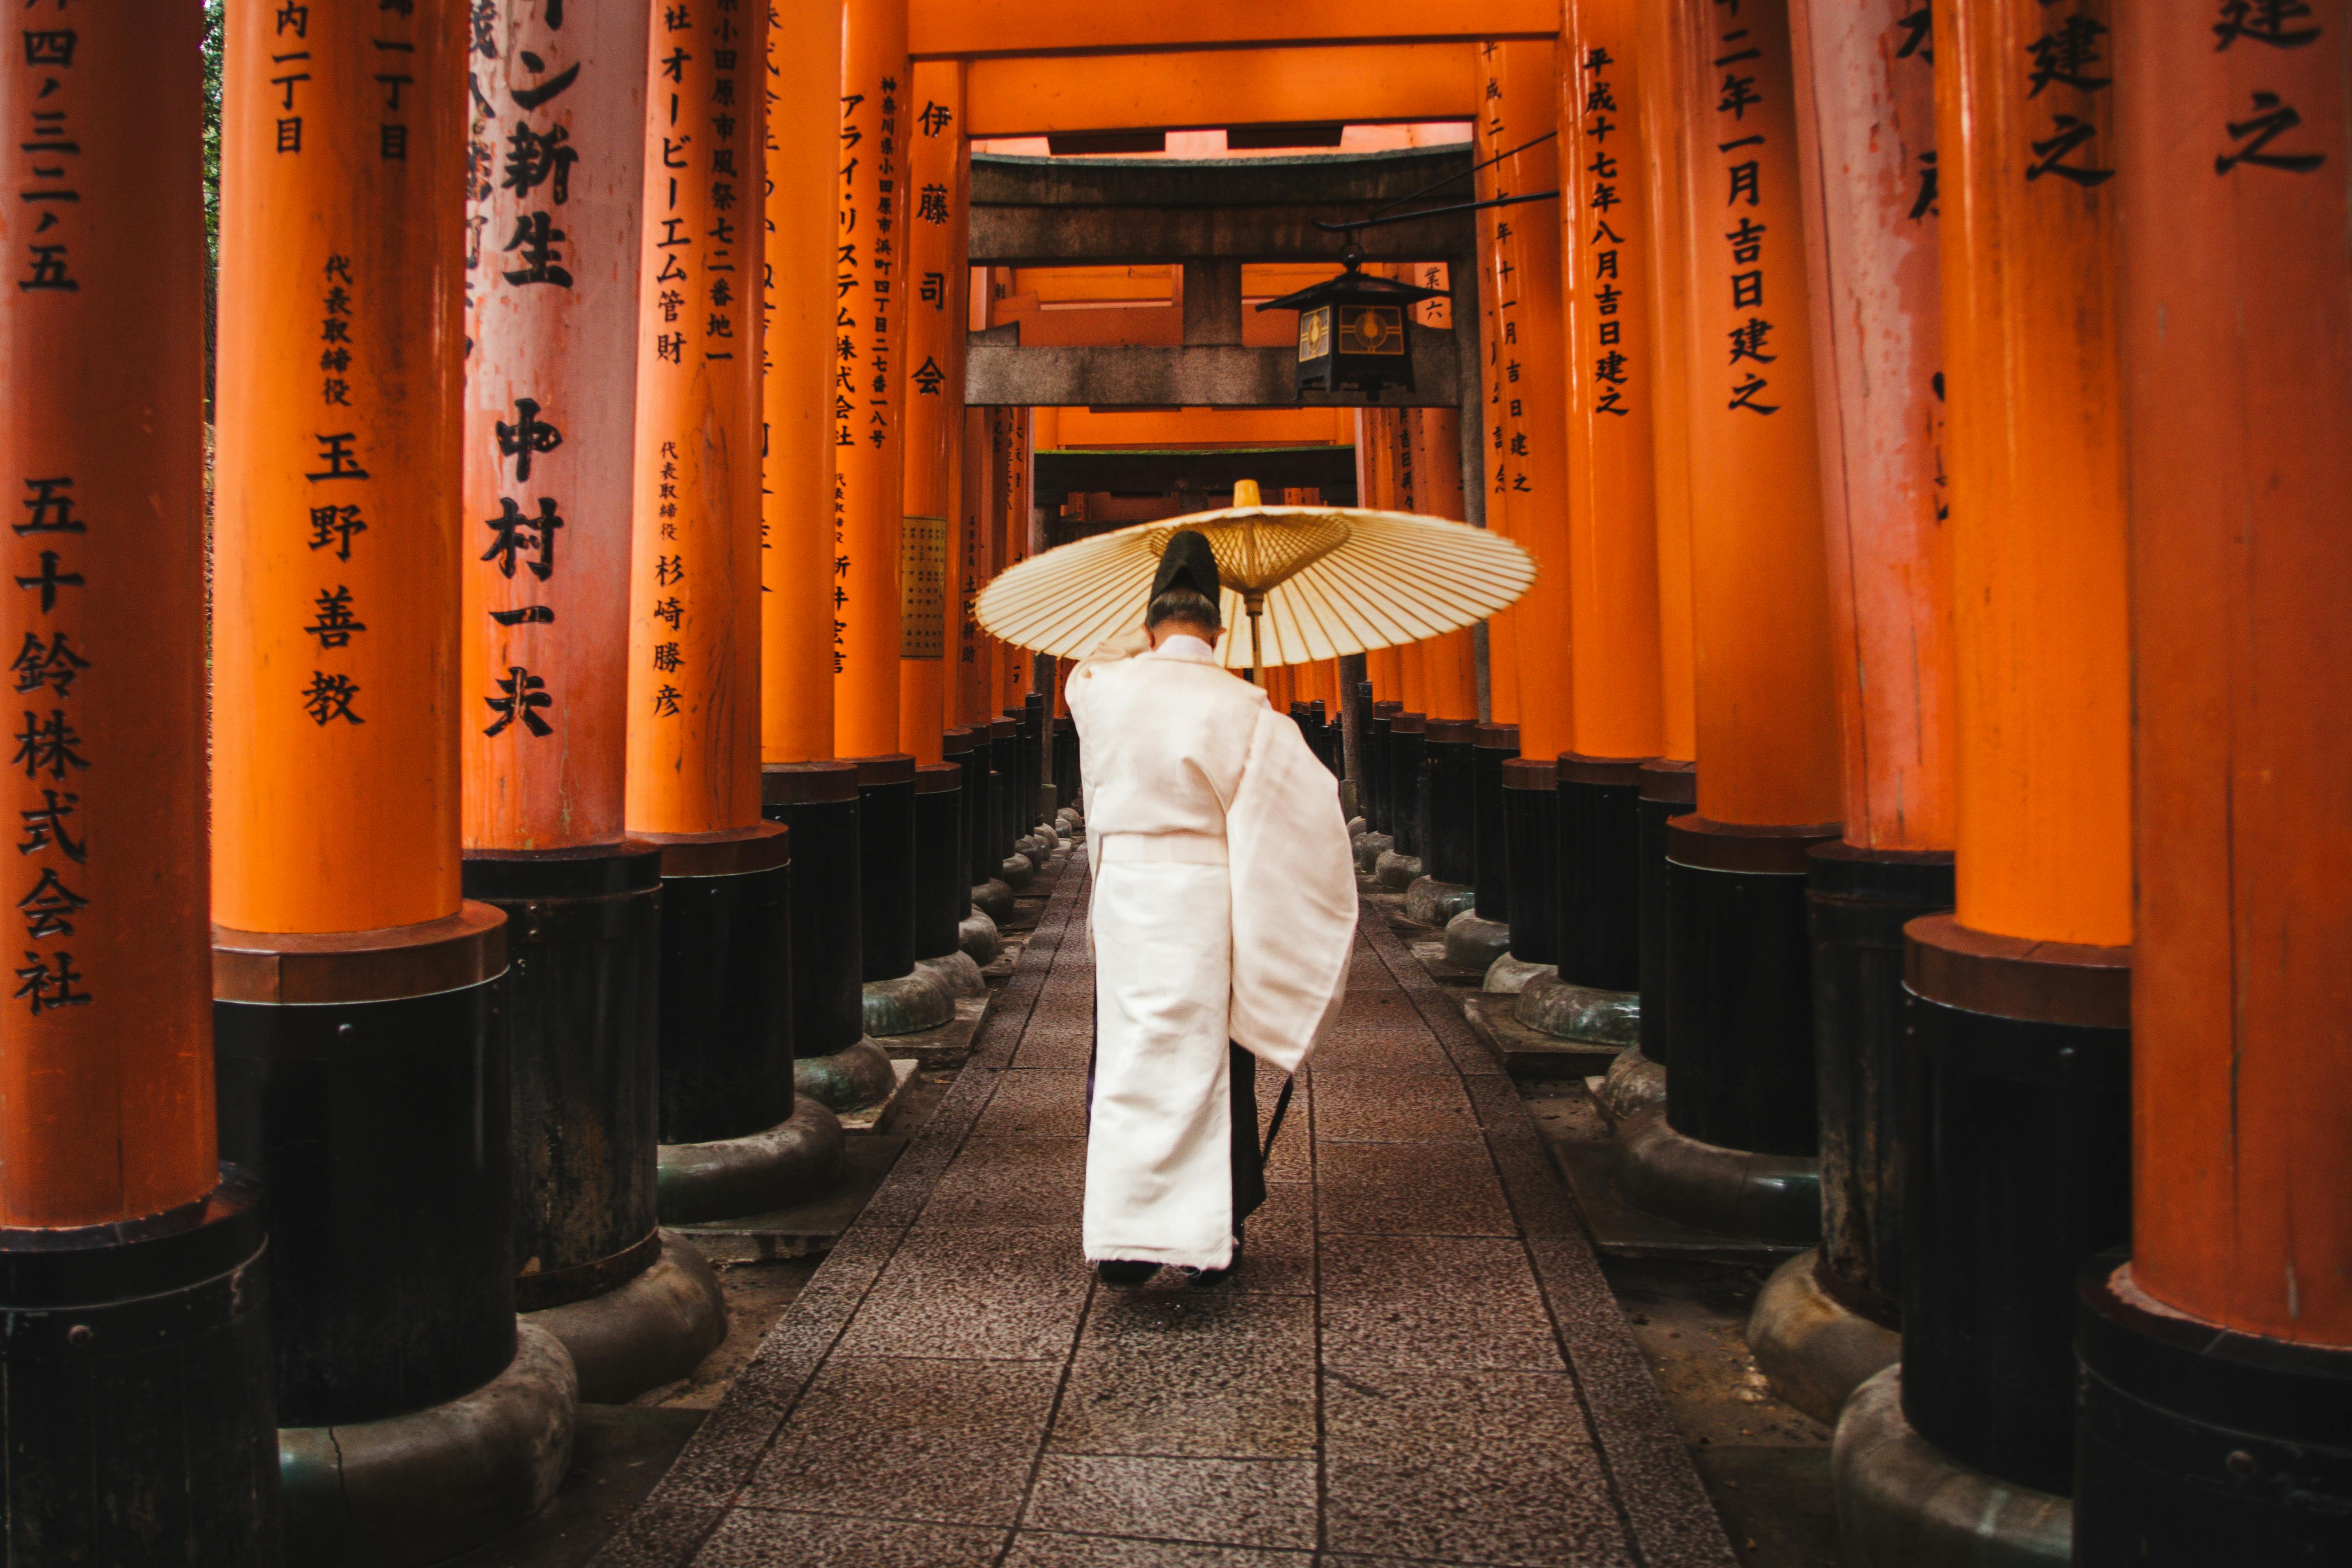 Book today for an exploration of Japan's rich heritage and unique aesthetics.